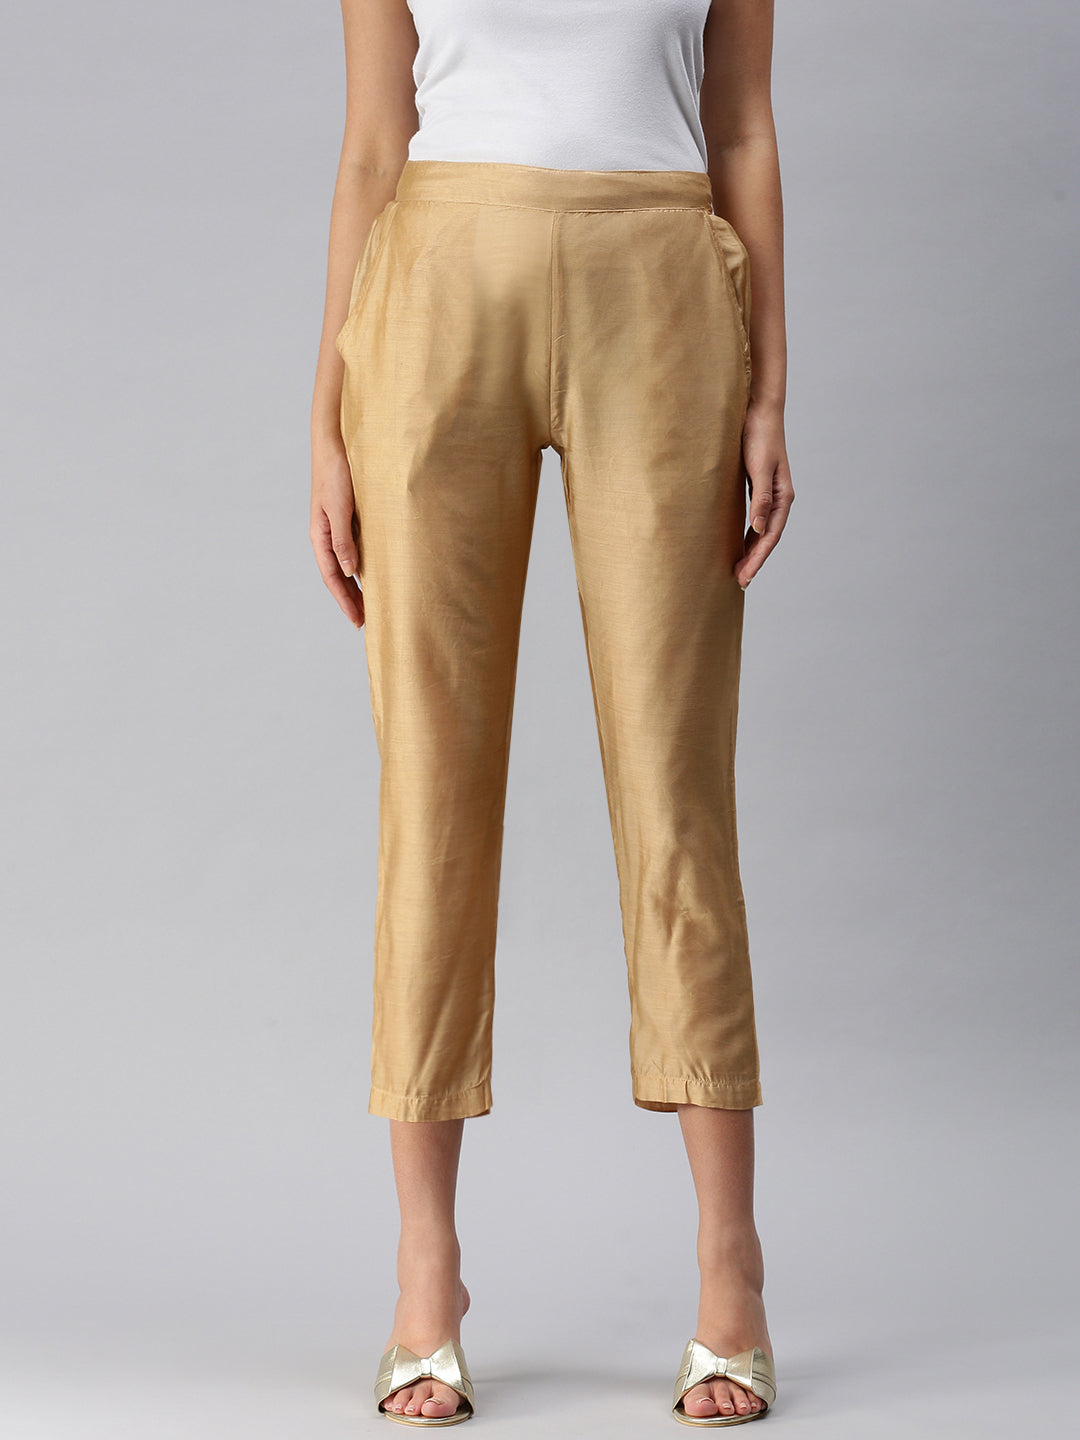 Off White Suit With High Low Hem And Front Slit Paired With Cigarette Pants  Online - Kalki